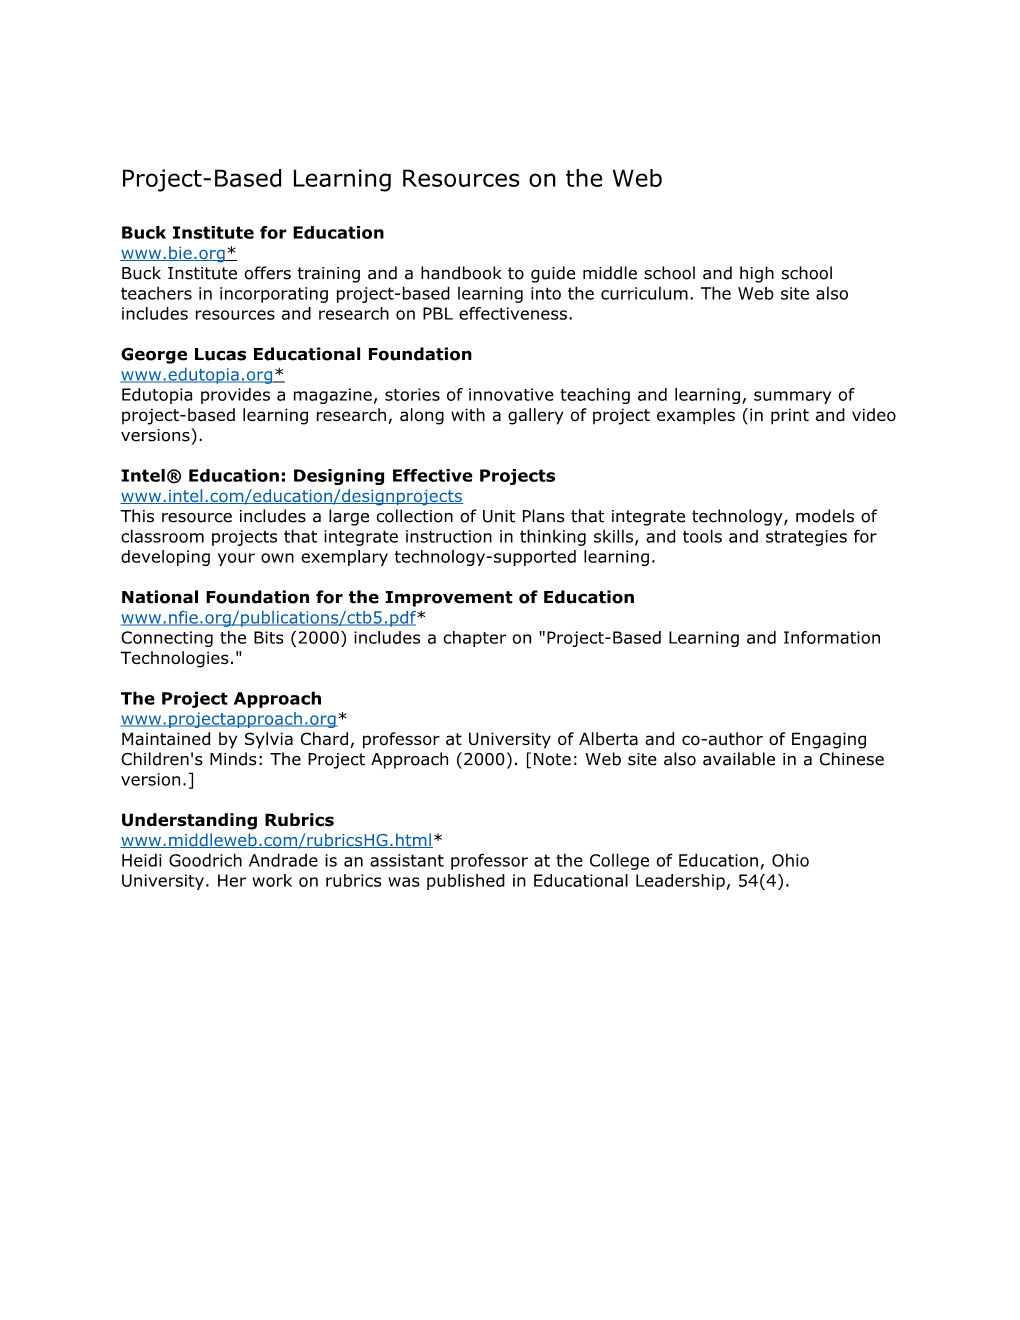 Assessment Resources on the Web